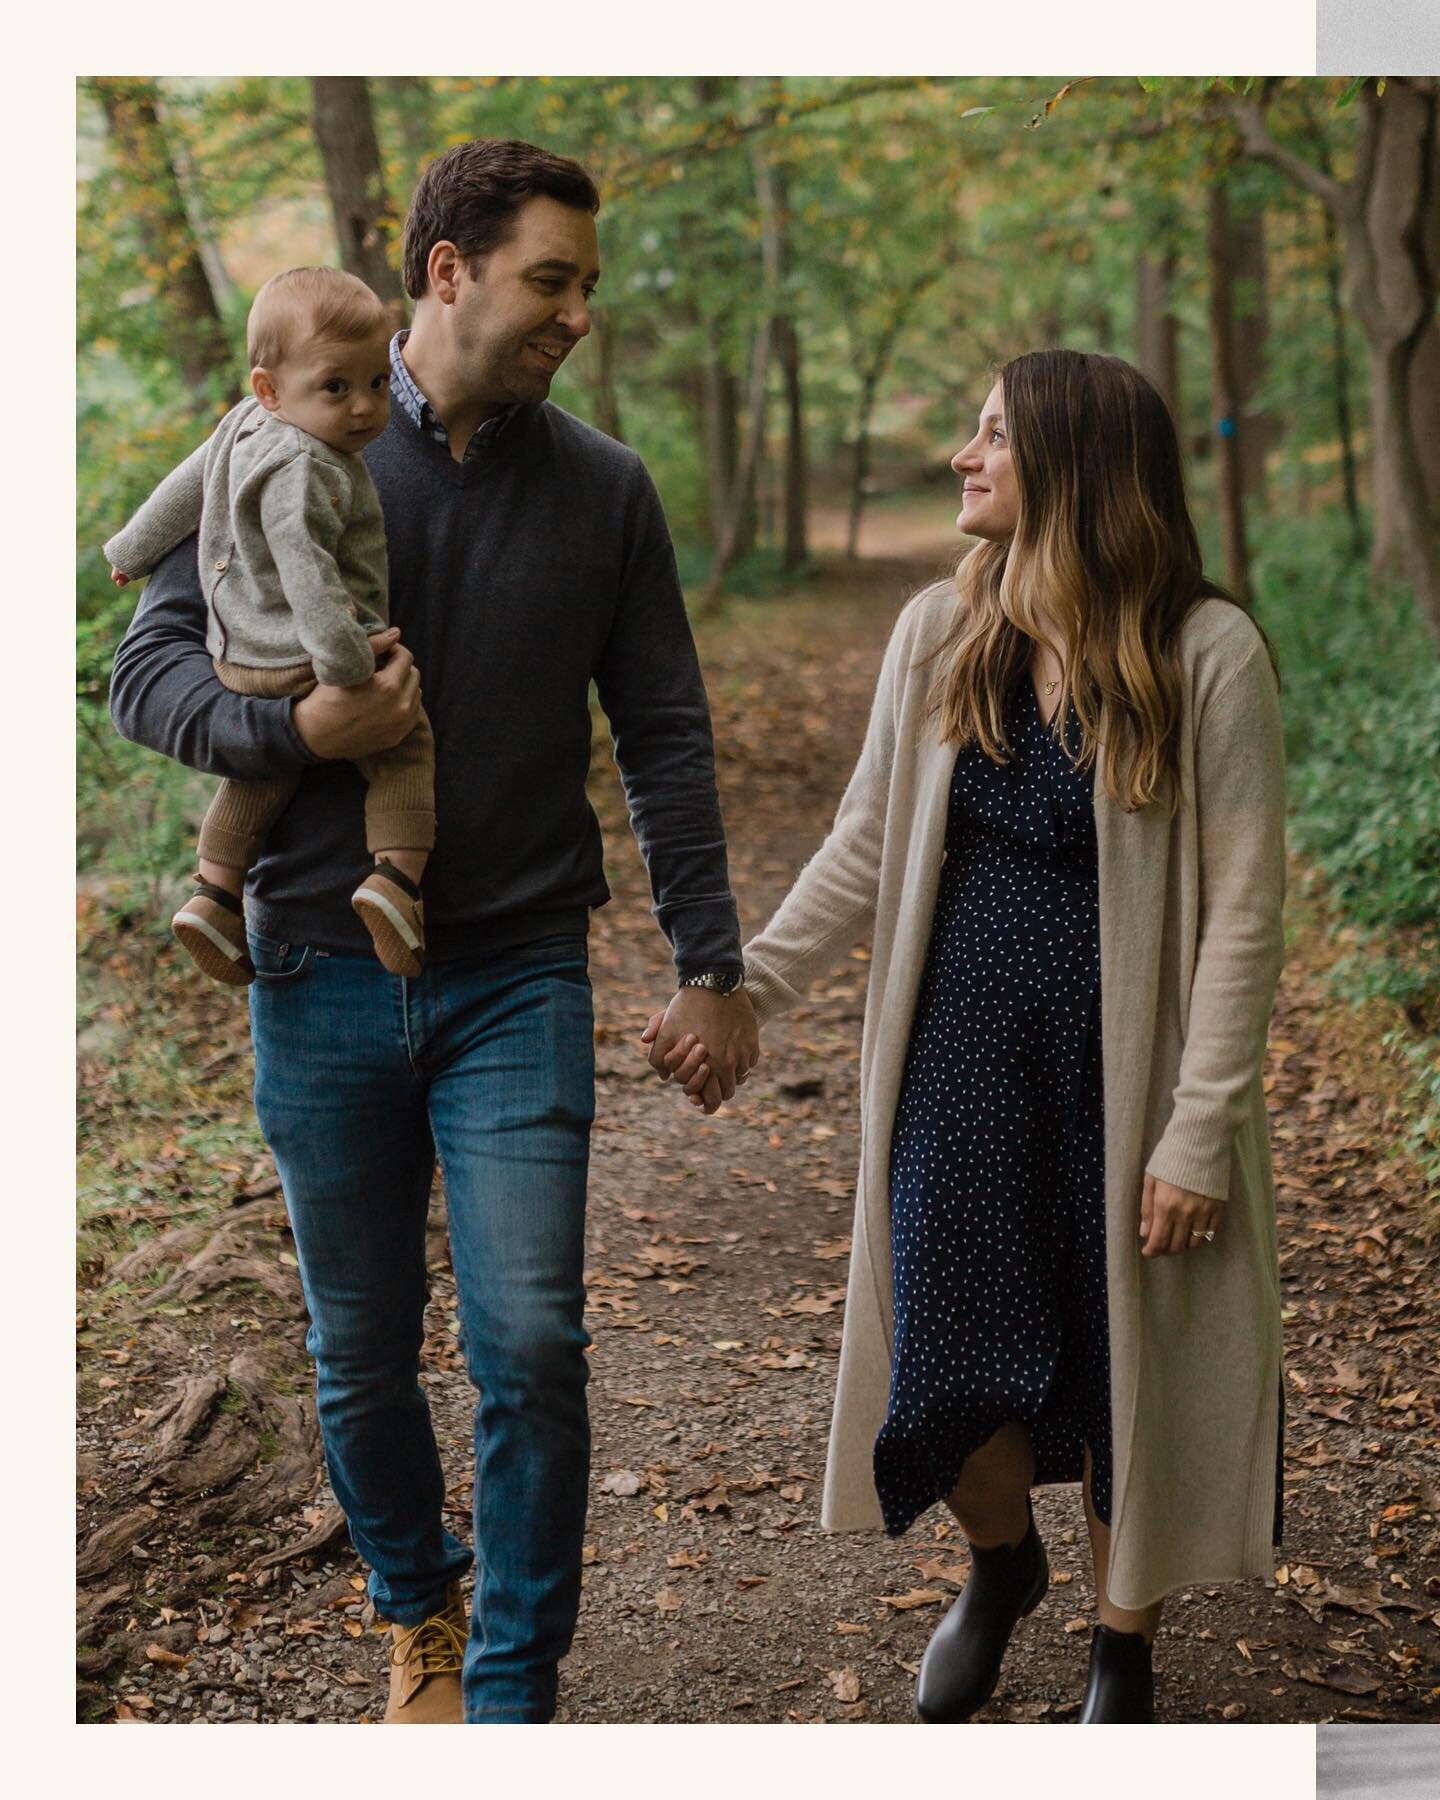 🎶I&rsquo;ve got fall on my mind&hellip;

And I am so excited to welcome back families and meet new ones this season. Mini sessions go LIVE for ALL (if you&rsquo;re on my email list you&rsquo;ve already received the link) this Monday the 12th. 

You&